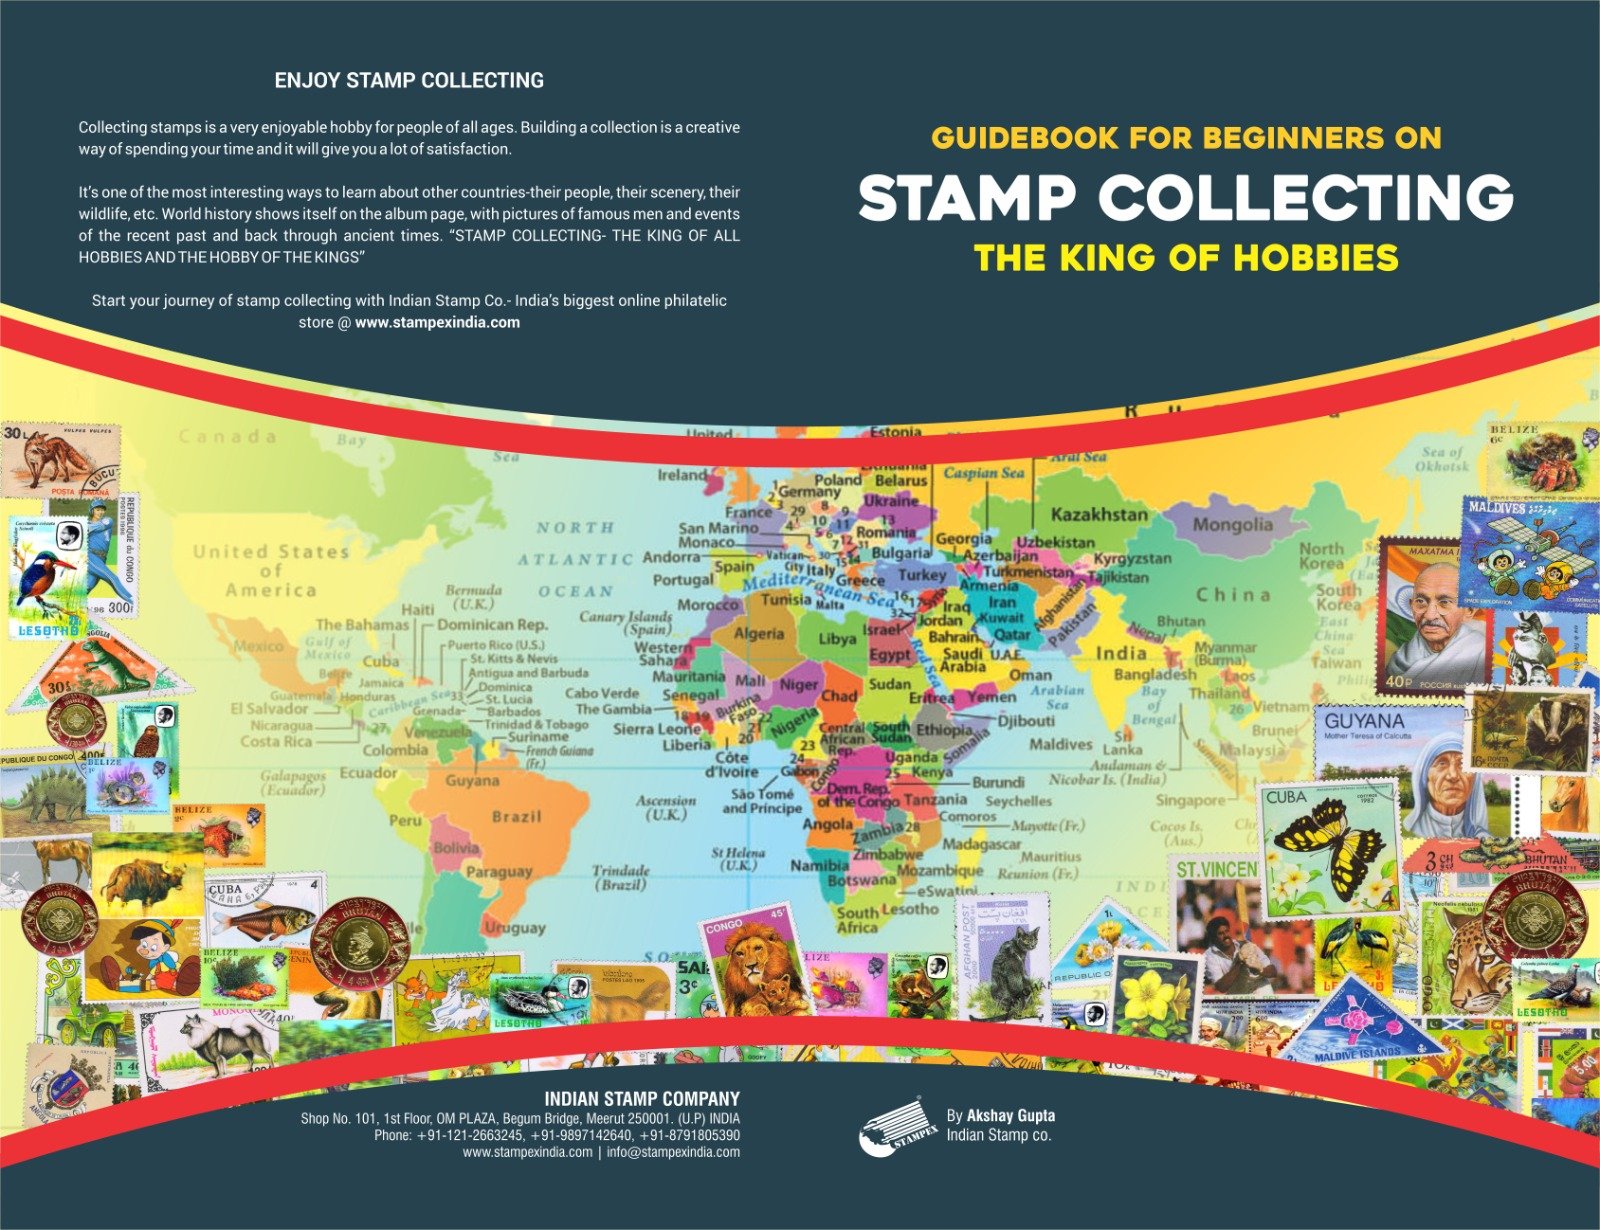 Stampex Guidebook For Beginners On Stamp Collecting - The King Of Hobbies, by Akshay Gupta, 32 Pages, 2023 Edition